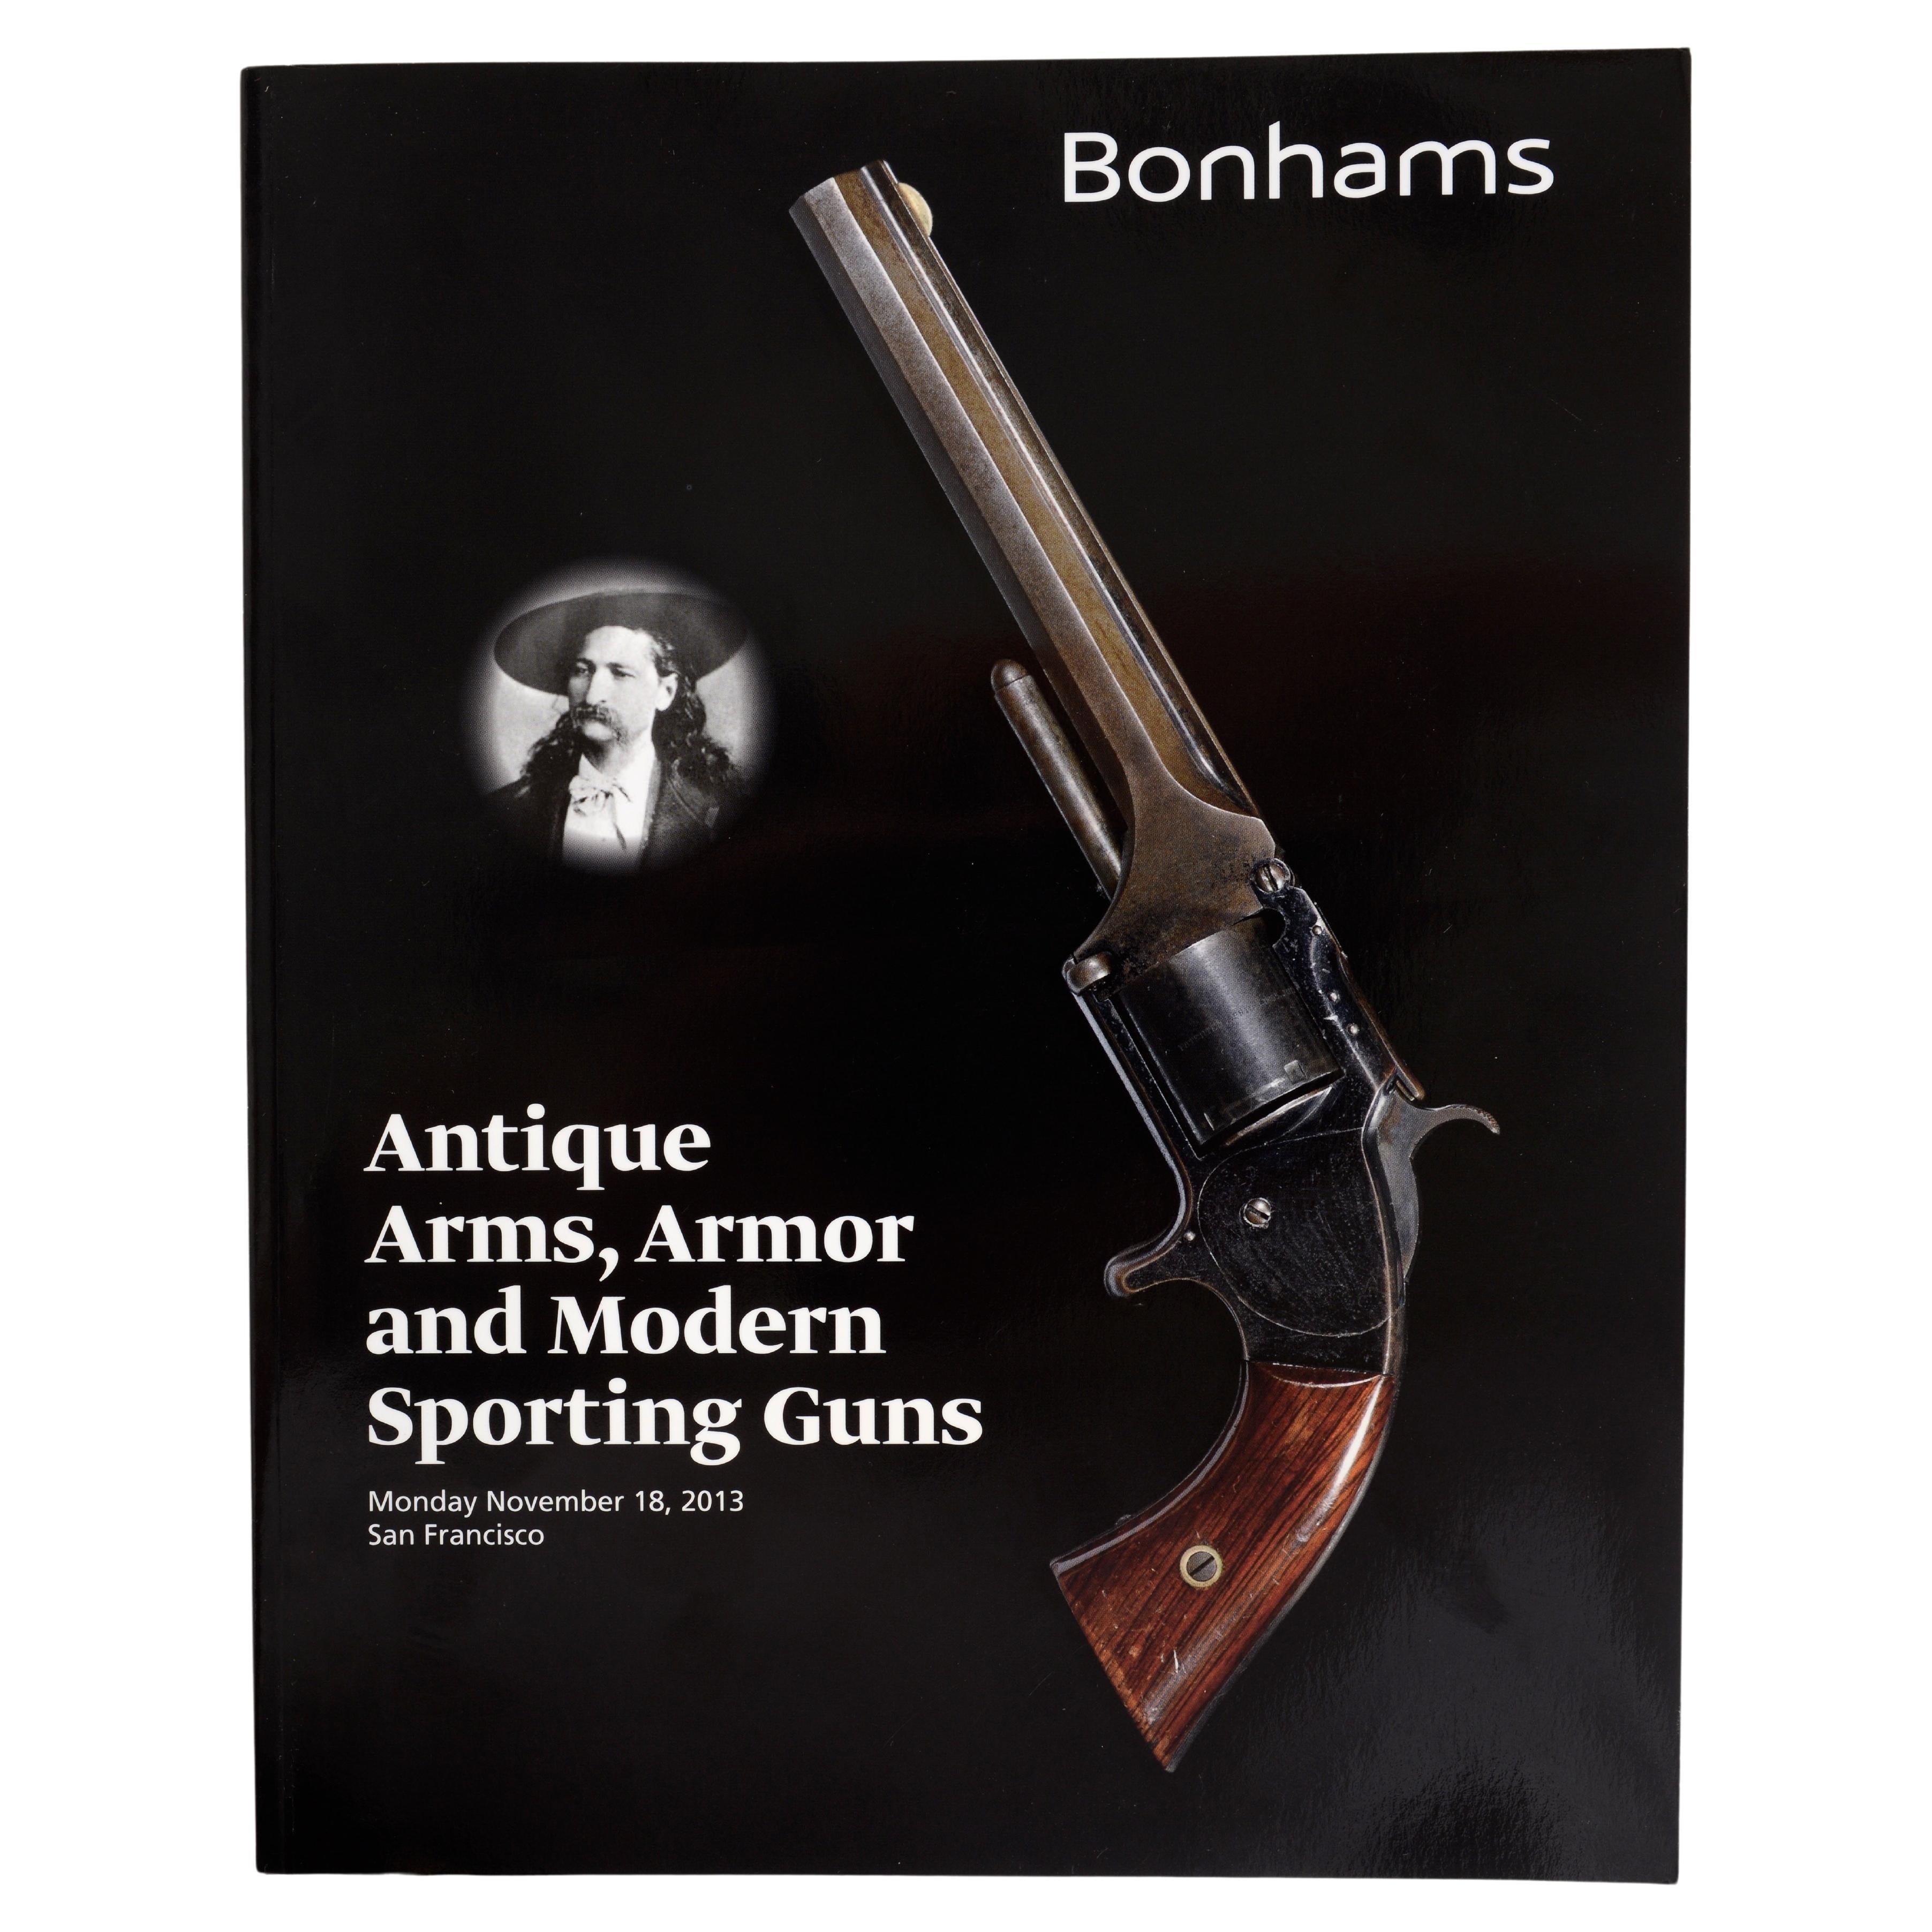 Bonhams 2013 Antique Arms & Armour Featured a Revolver Owned by Wild Bill Hickok